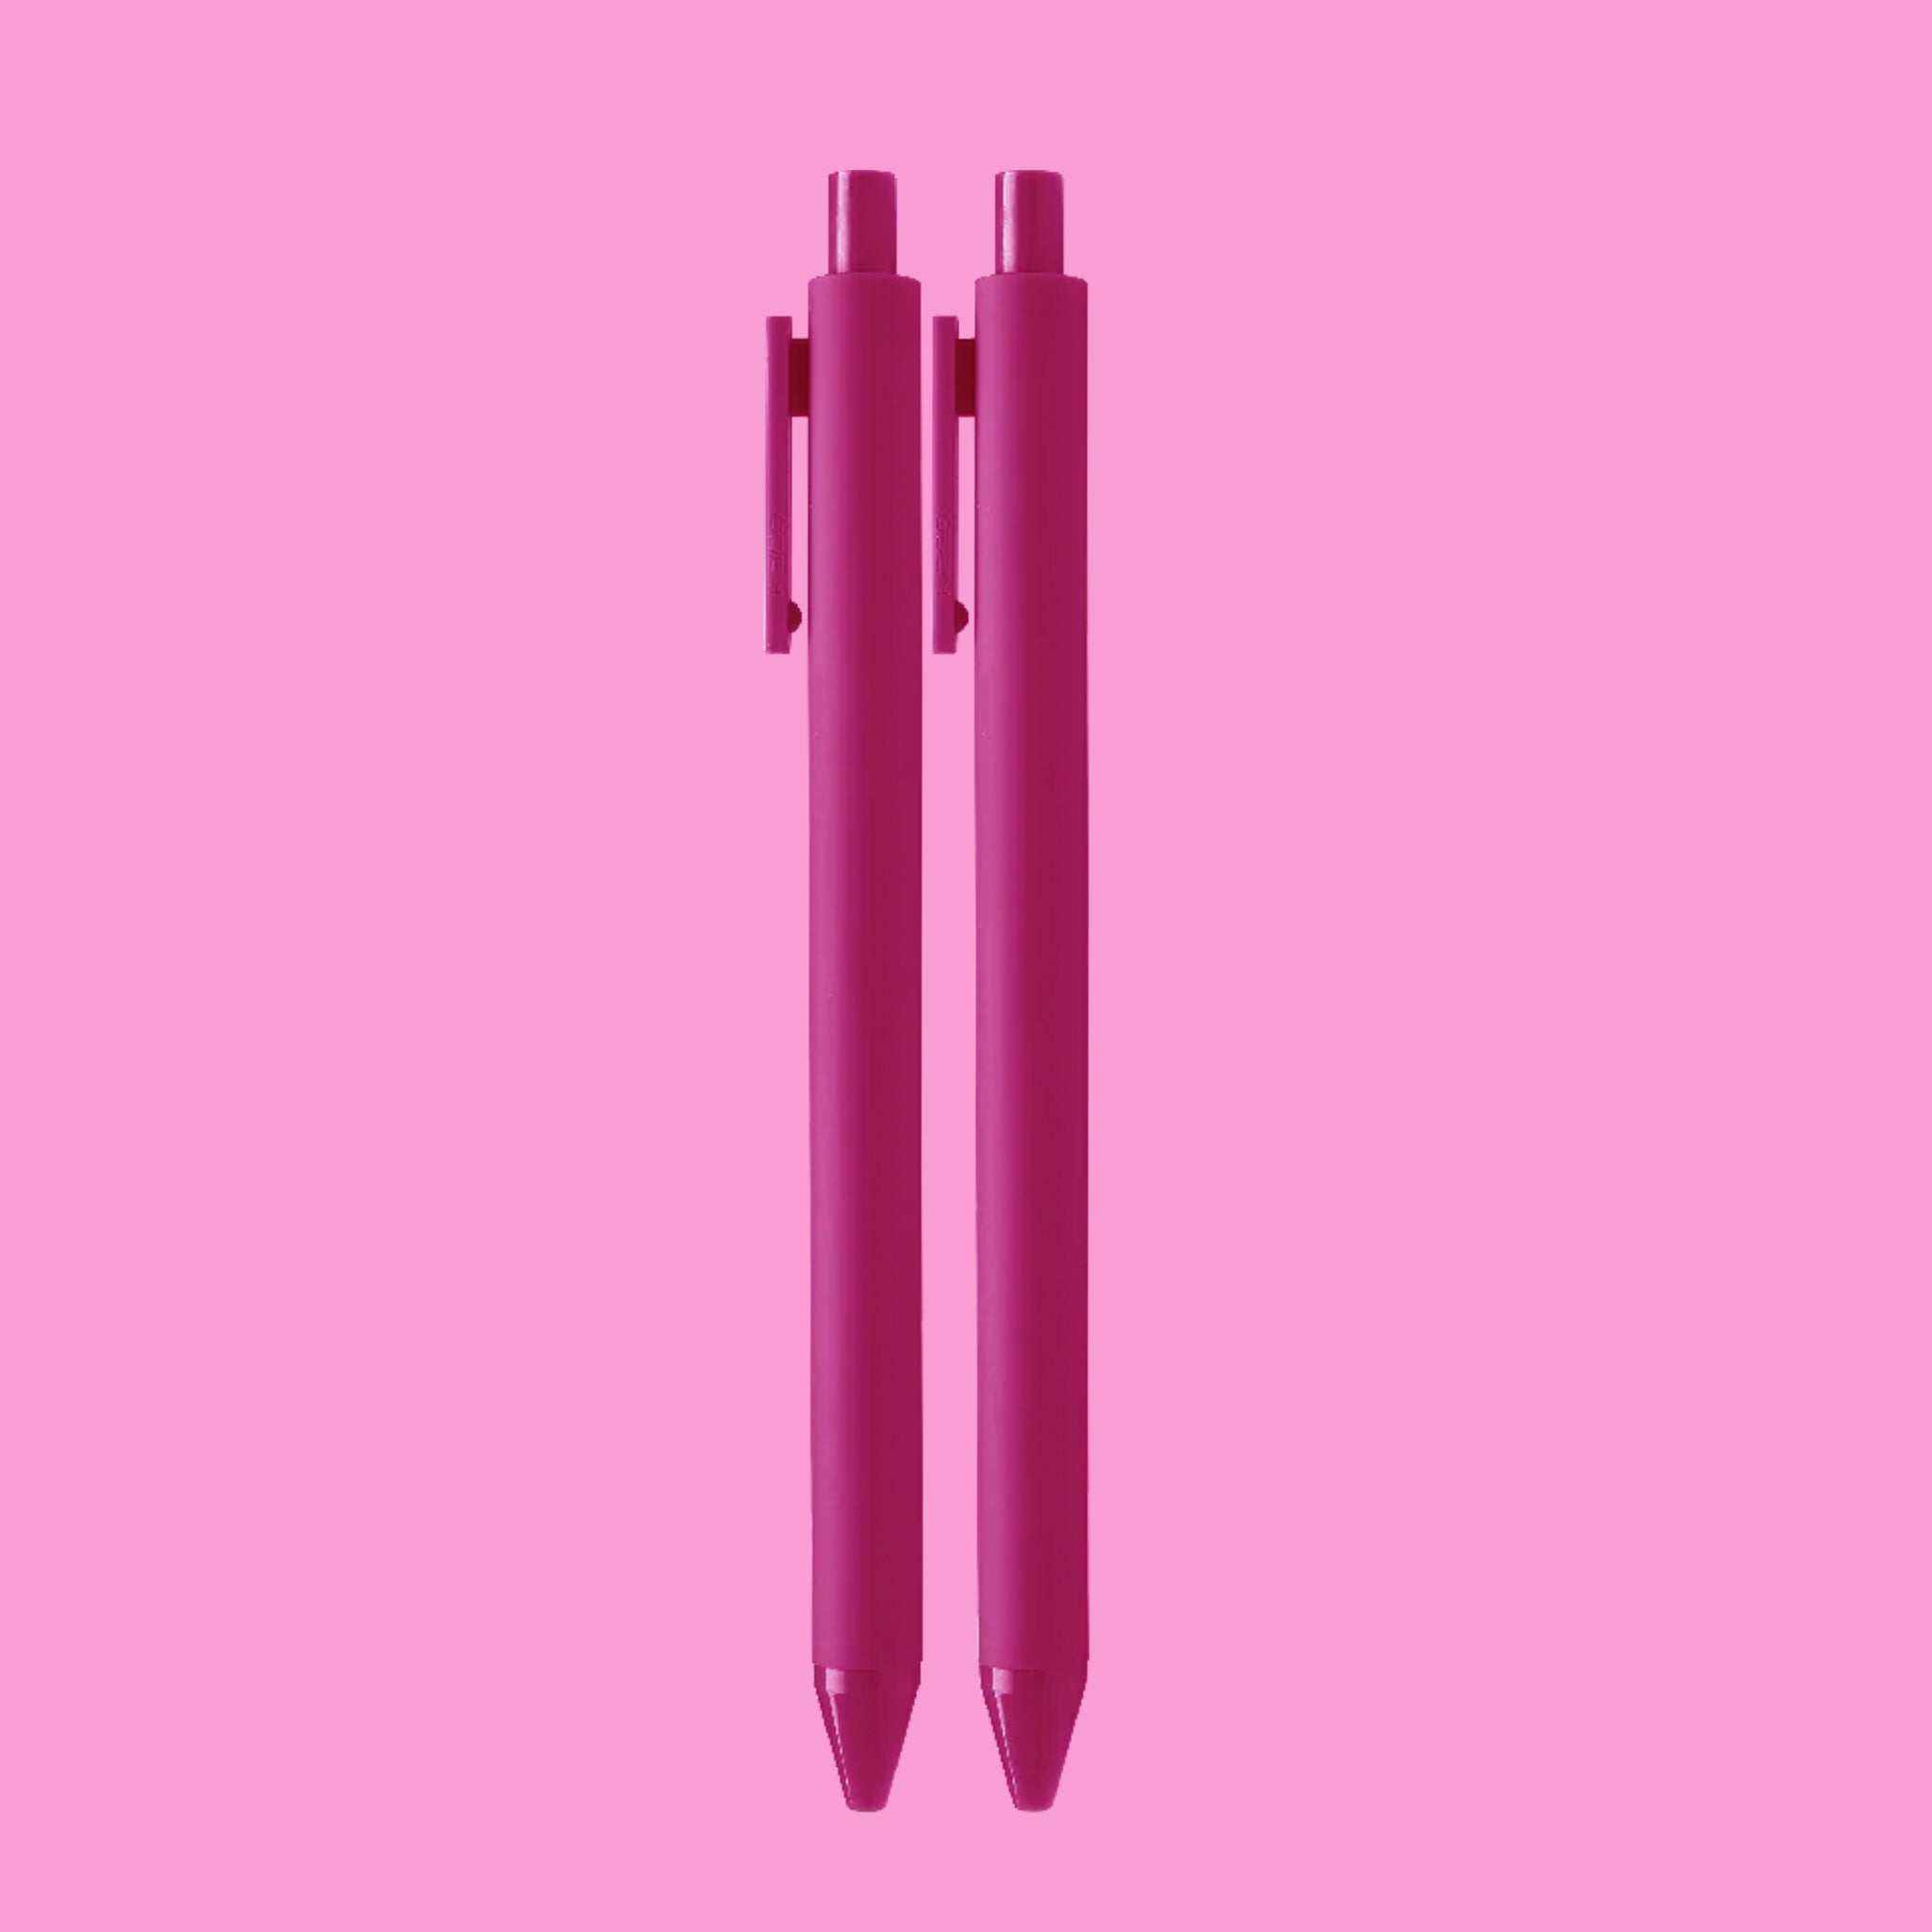 On a pink background is a light pink set of ballpoint pens.